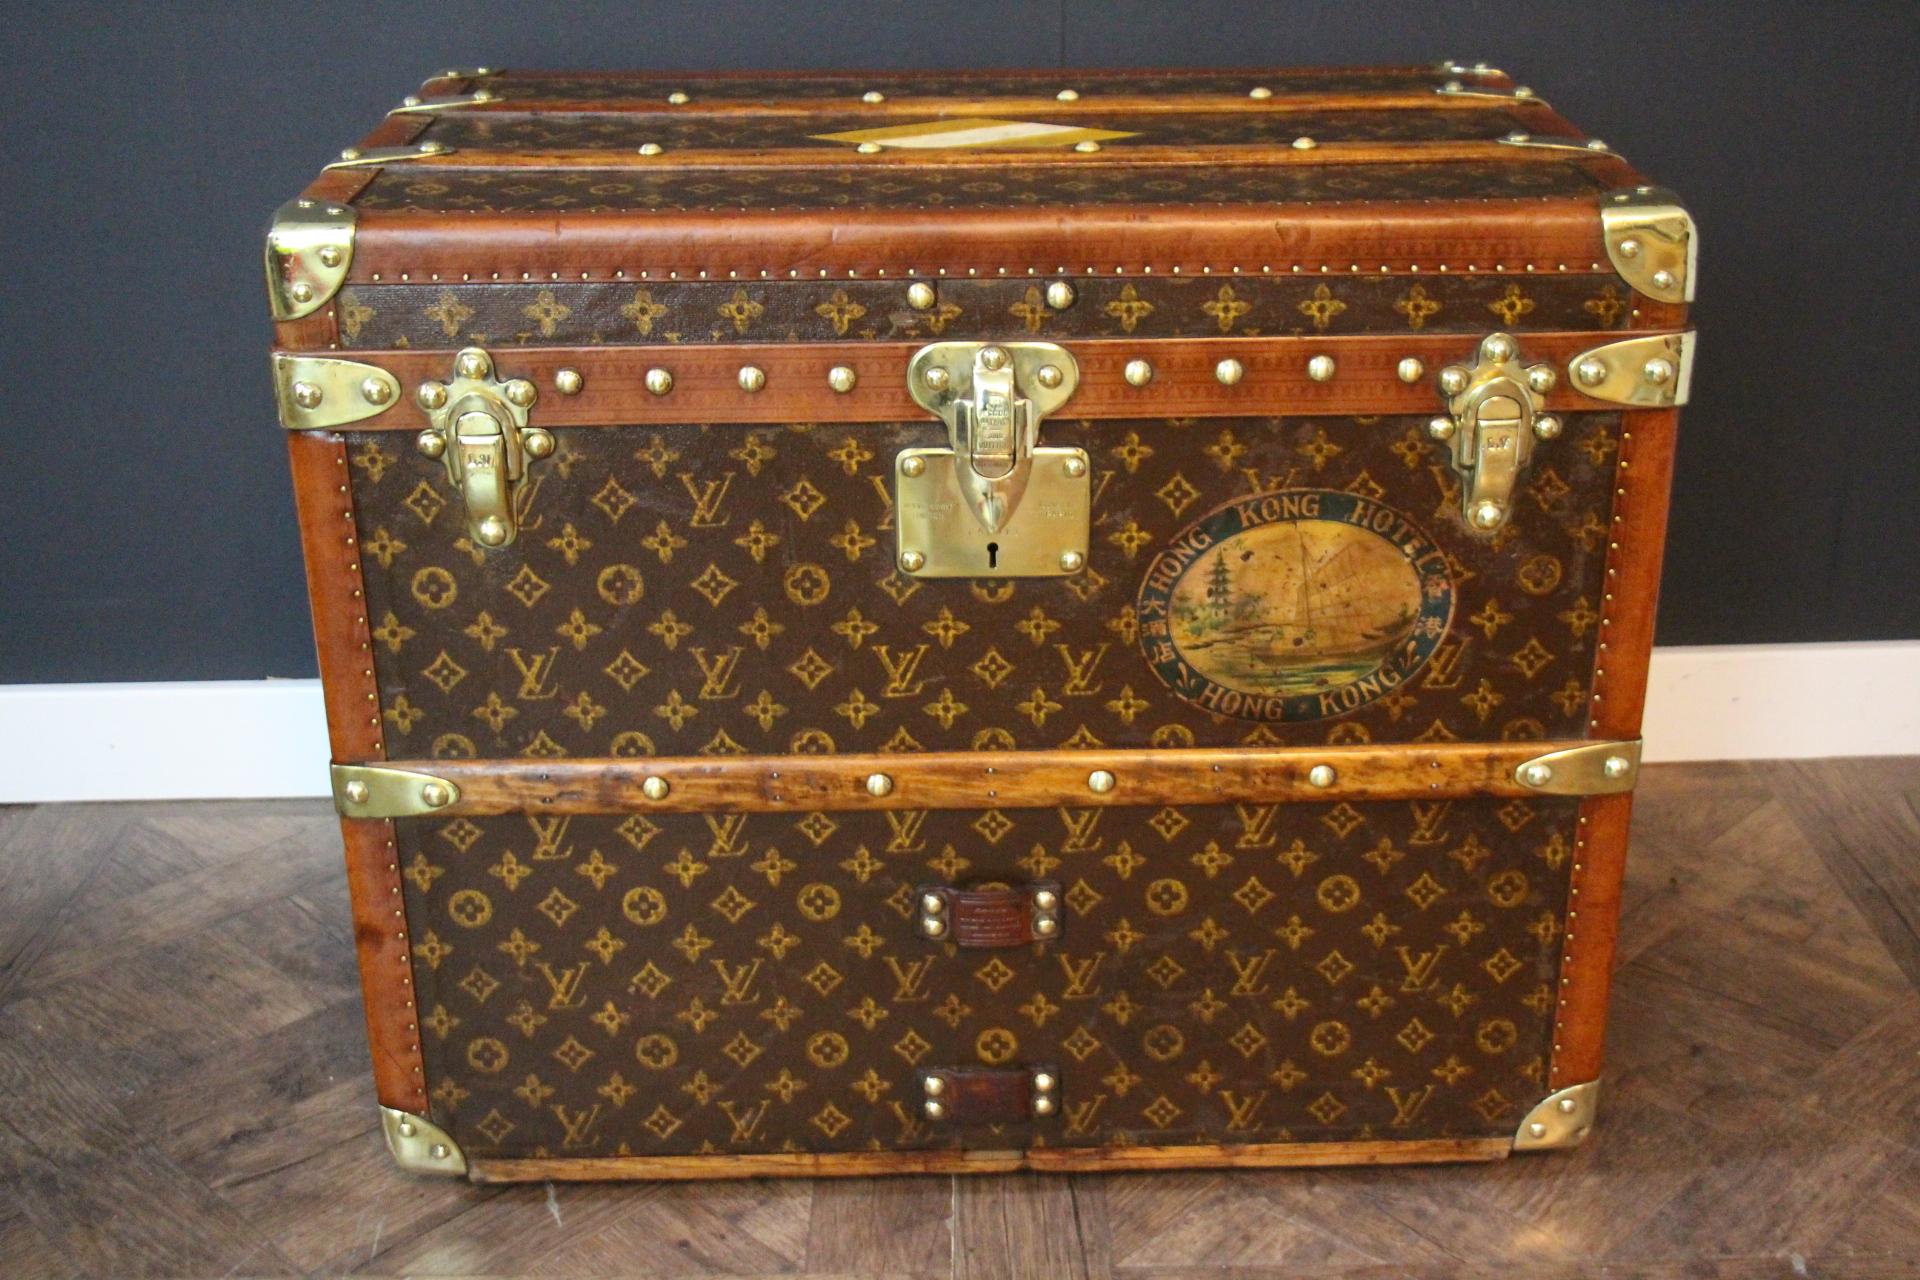 This magnificent Louis Vuitton shoe trunk features stenciled canvas monogram, Louis Vuitton stamped solid brass locks, brass studs and leather side handles. Its leather side handles are embossed Louis Vuitton. units clamps. It also has got a